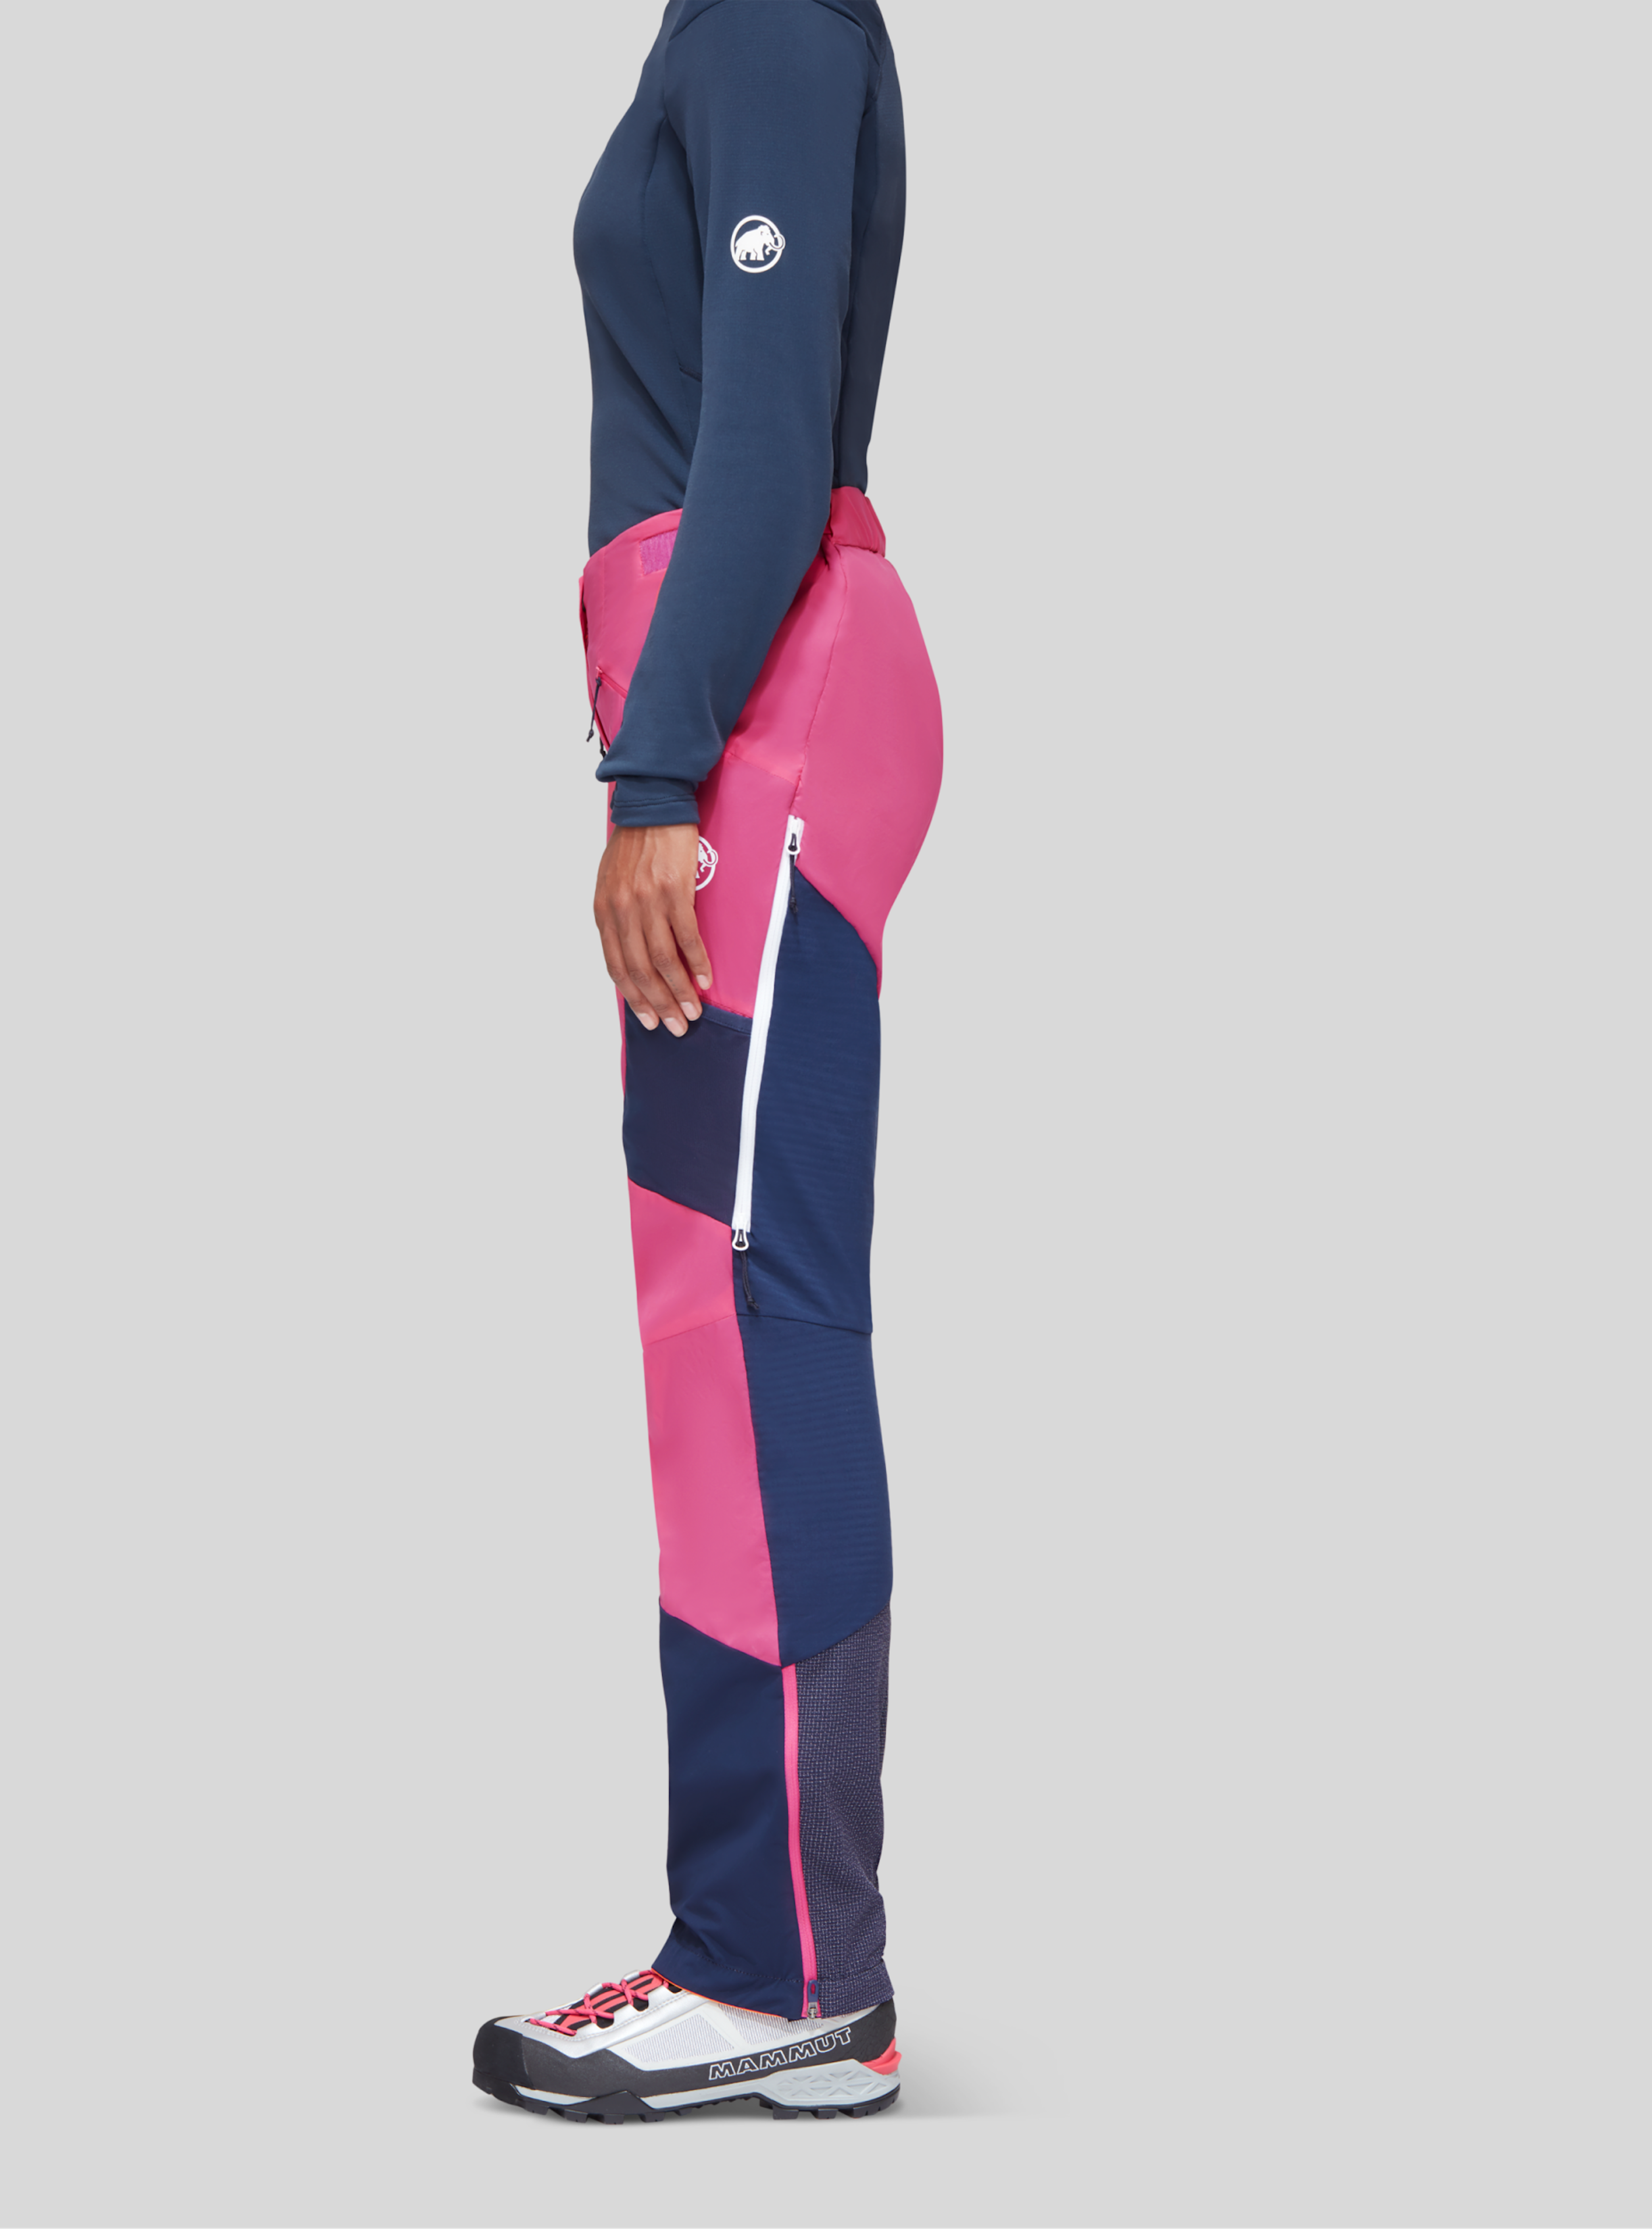 Mammut pants for women in blue / pink